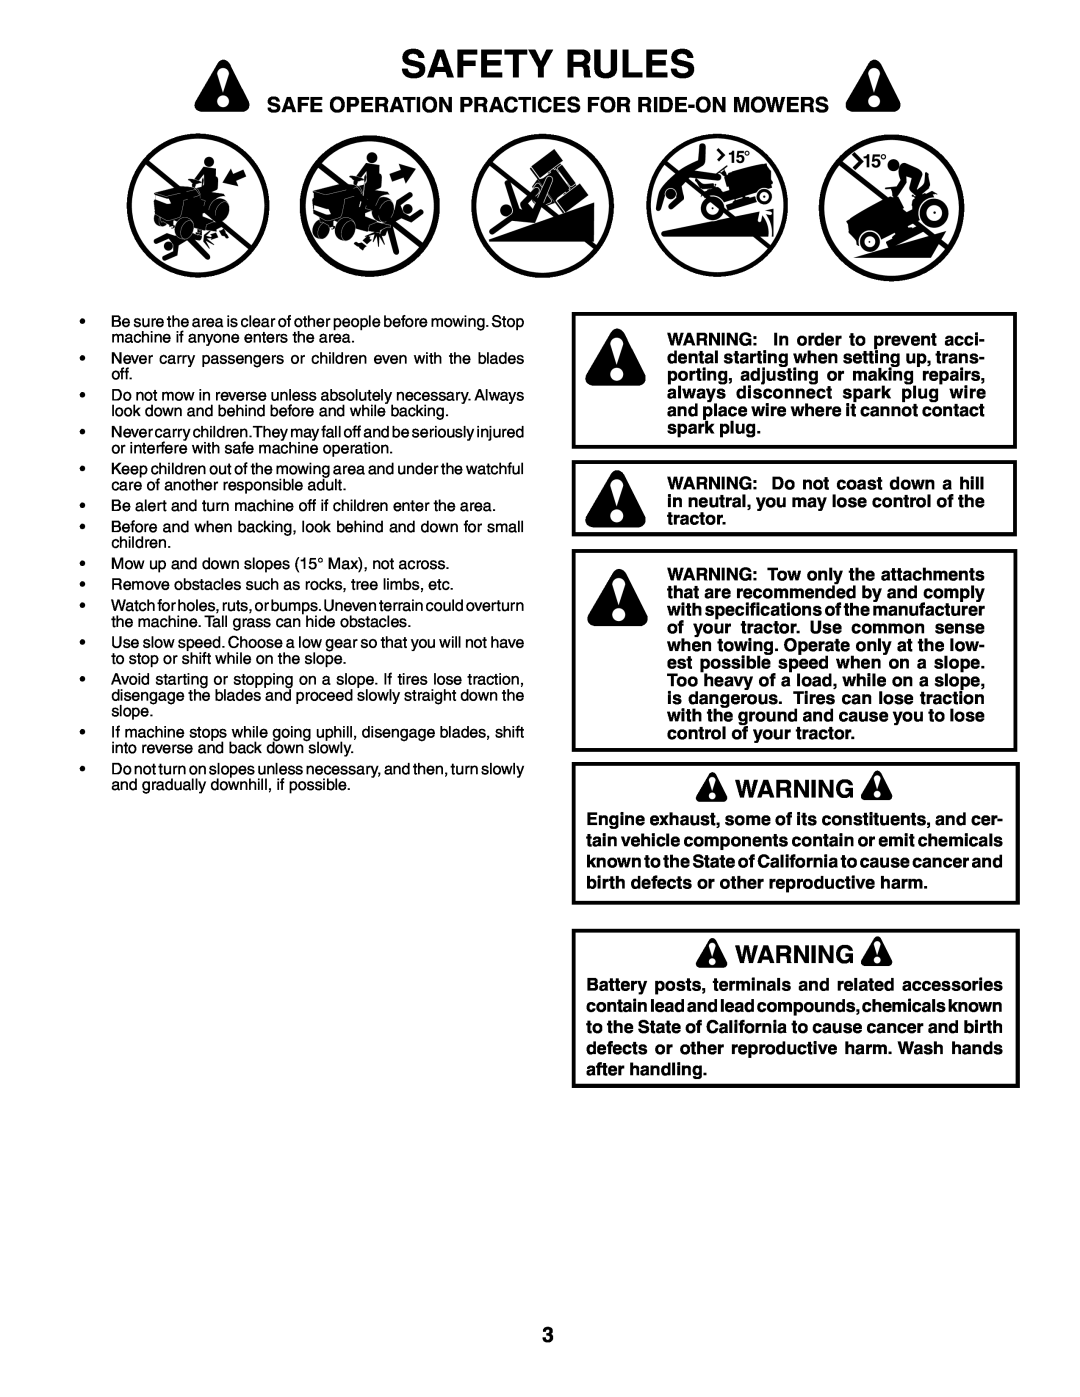 Poulan 185498, 954569516 owner manual Safety Rules, Safe Operation Practices For Ride-On Mowers 